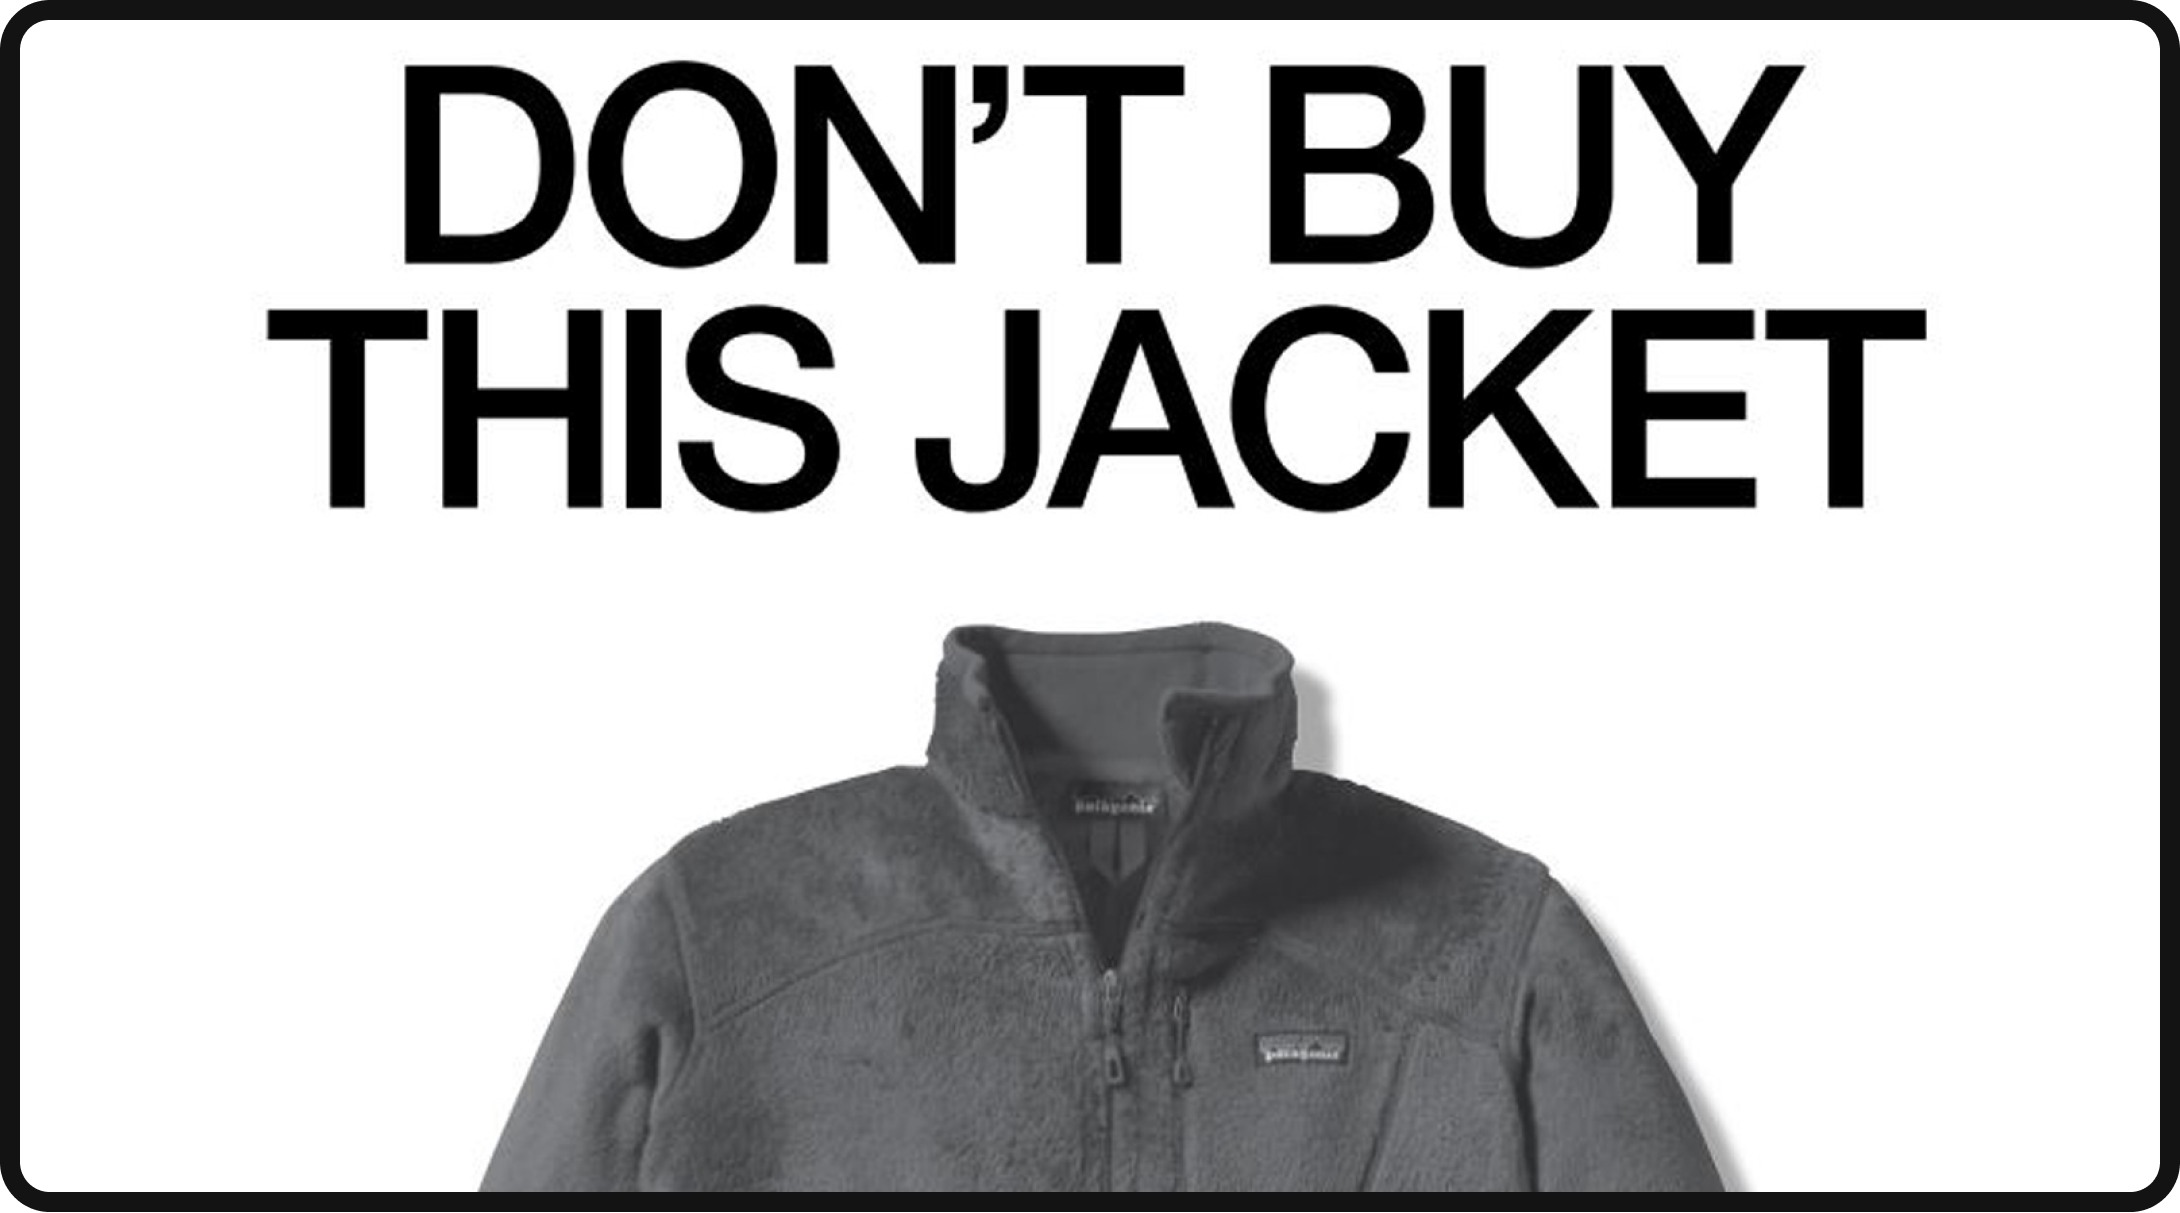 Don't buy this jacket campaign